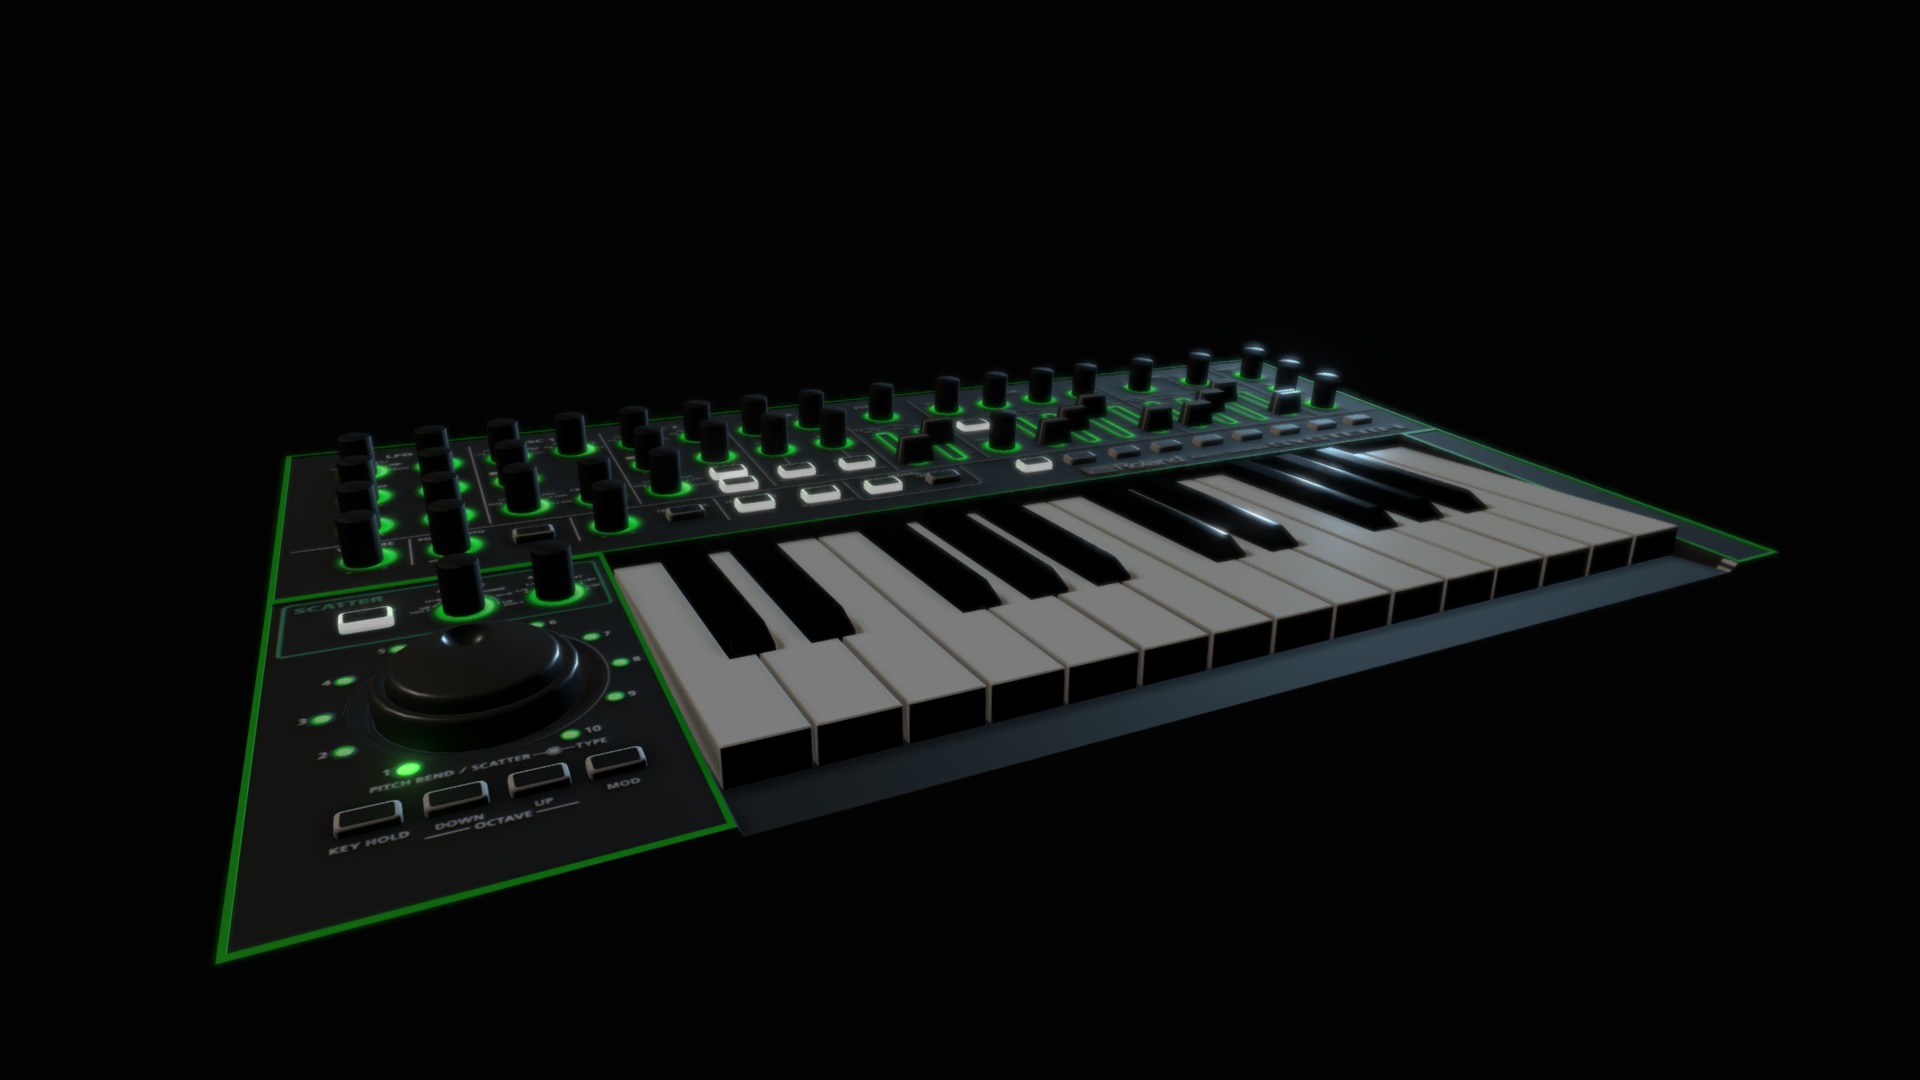 3D model Roland AIRA SYSTEM-1 (Porter Robinson VR) - This is a 3D model of the Roland AIRA SYSTEM-1 (Porter Robinson VR). The 3D model is about a computer chip with a green light.